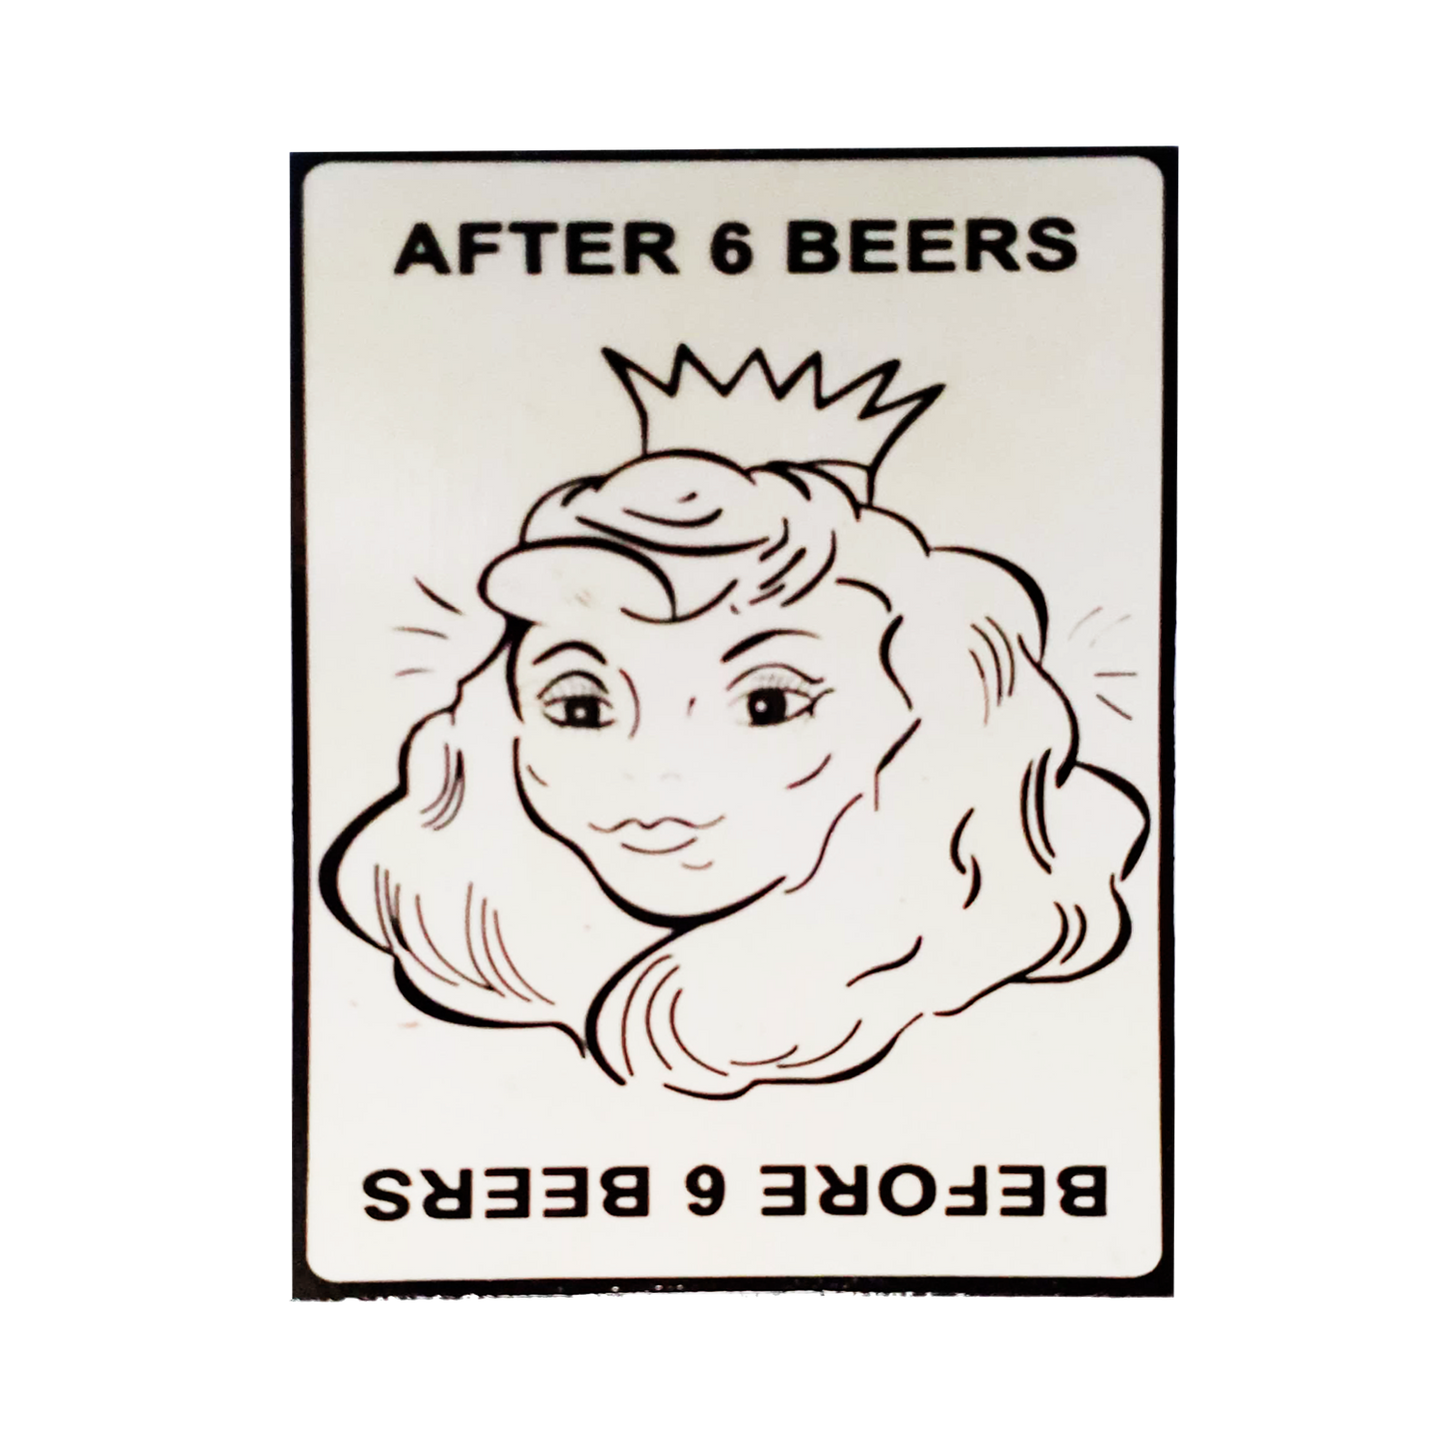 Afiche "Before 6 beers"